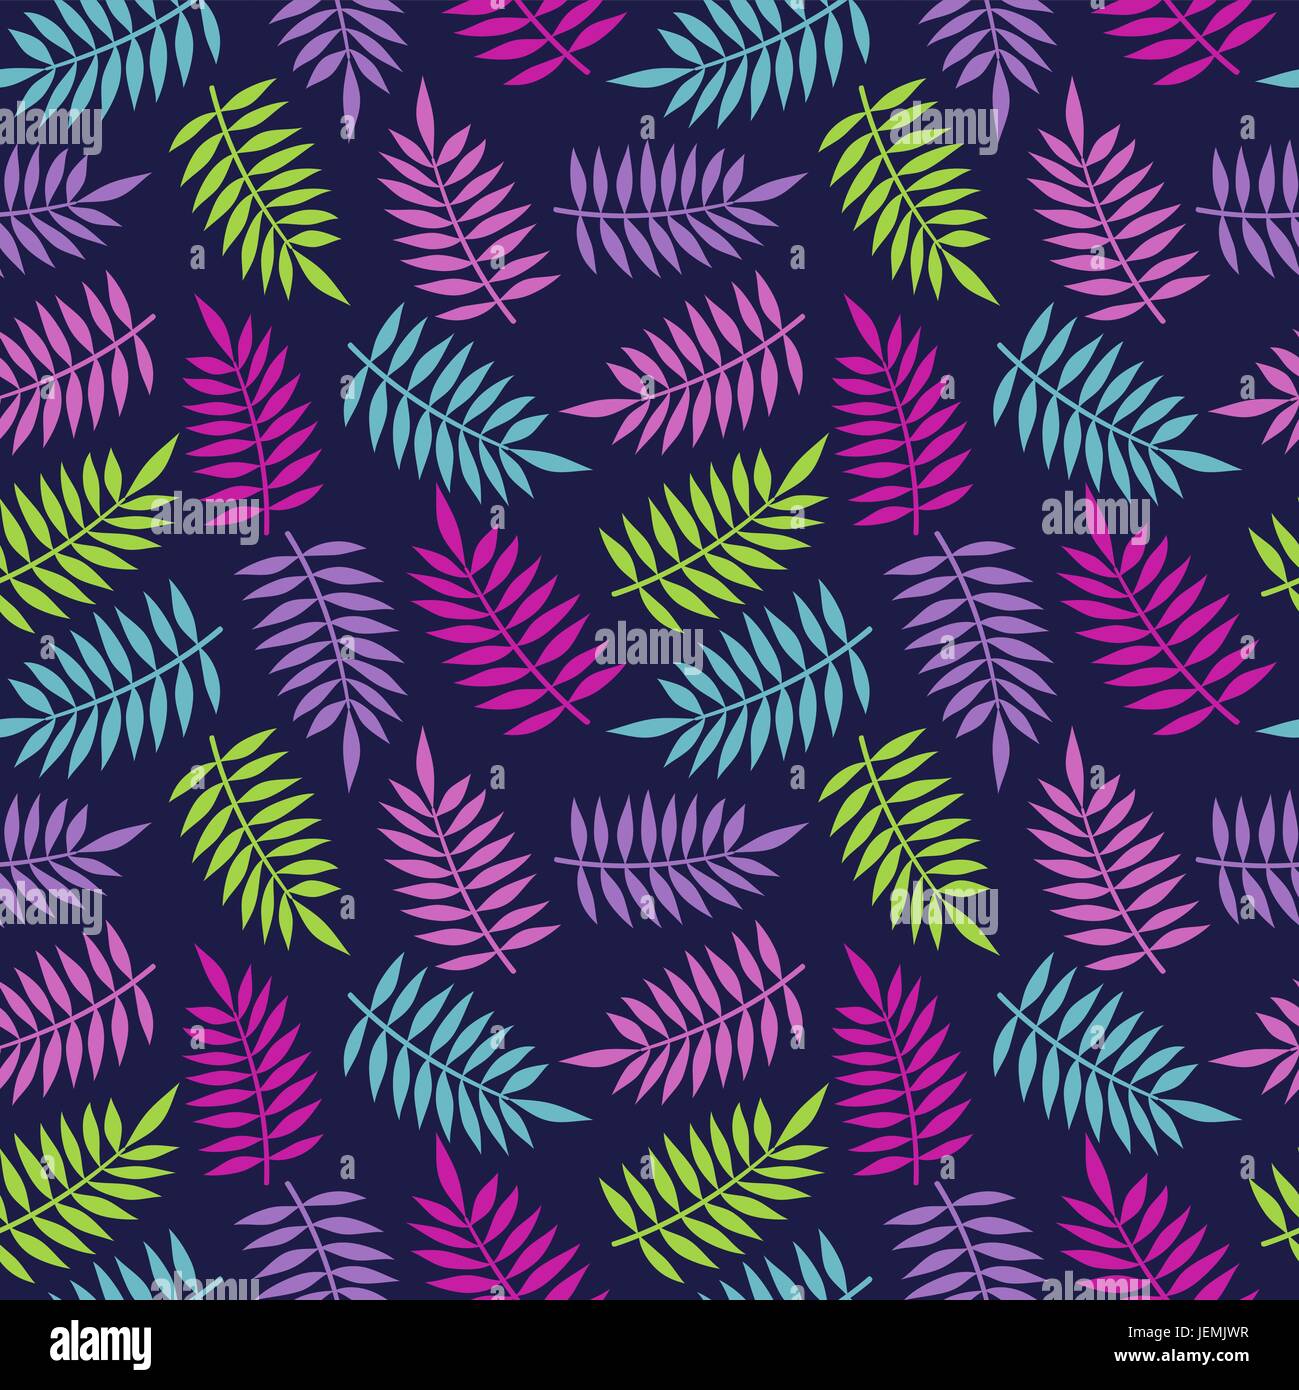 Tropical summer seamless pattern with colorful jungle palm tree leaf illustration. EPS10 vector. Stock Vector